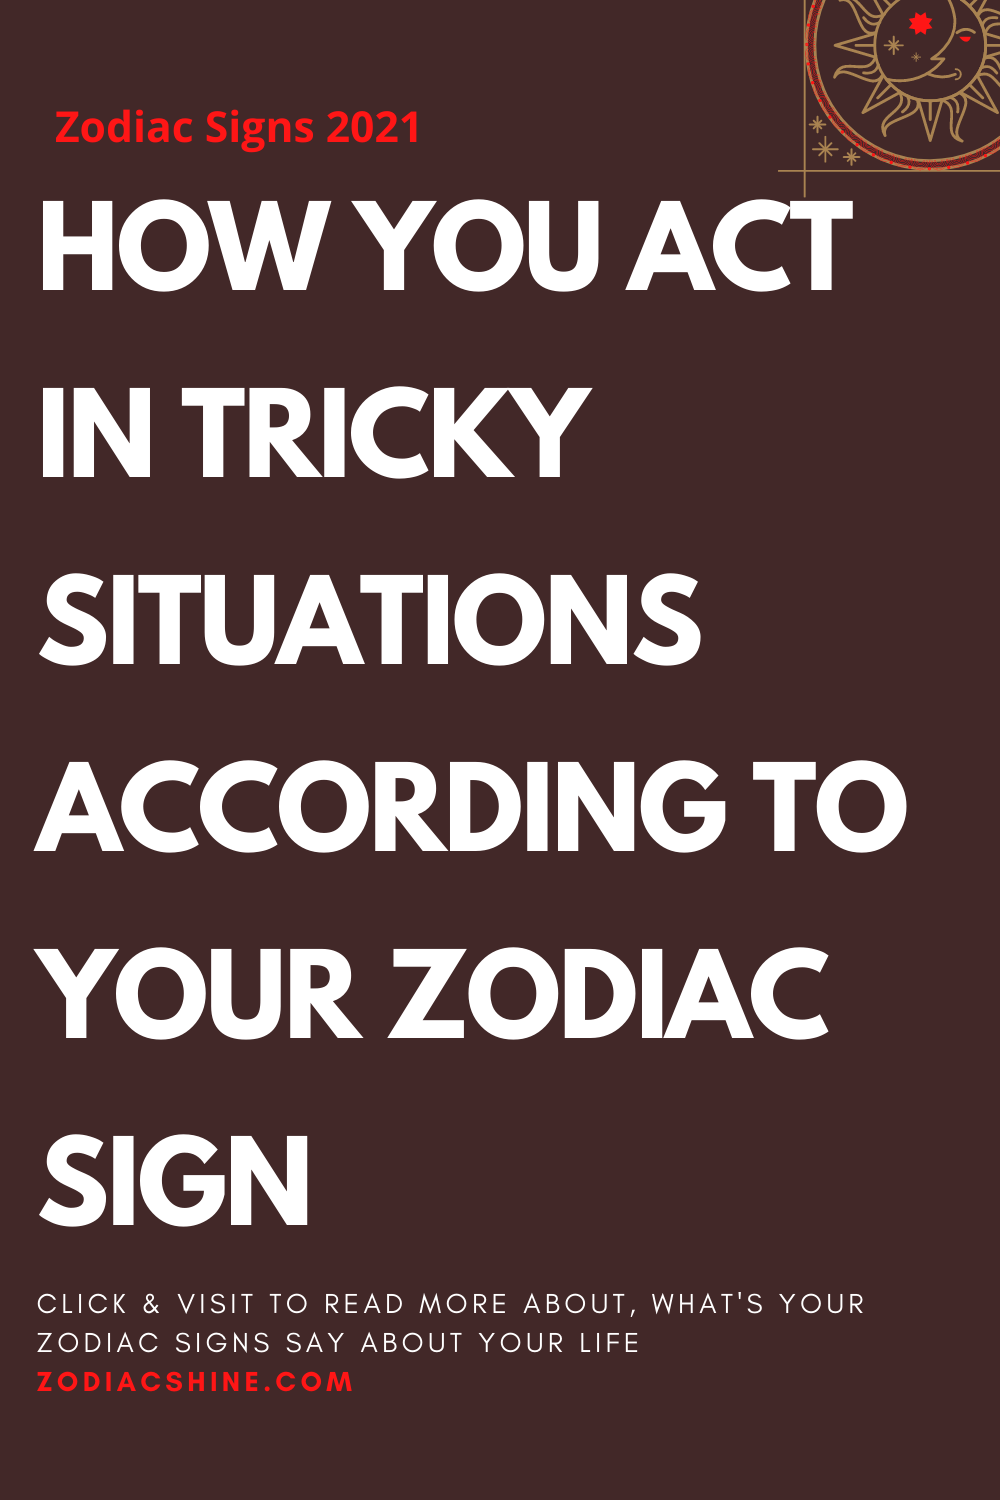 HOW YOU ACT IN TRICKY SITUATIONS ACCORDING TO YOUR ZODIAC SIGN